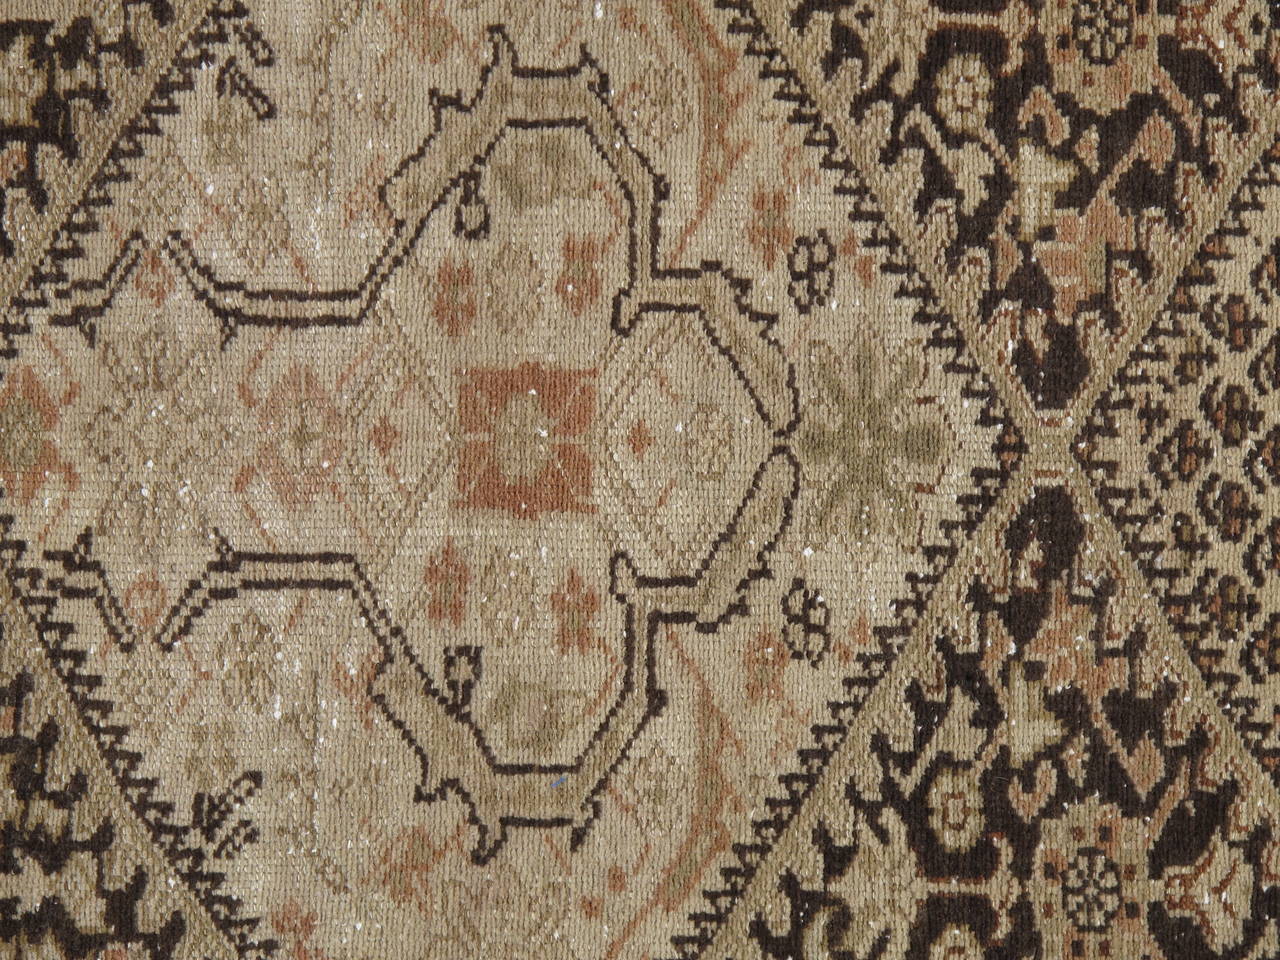 Antique Persian Malayer Carpet, Handmade Oriental Rug, Ivory, Taupe, Brown, Fine In Excellent Condition For Sale In Port Washington, NY